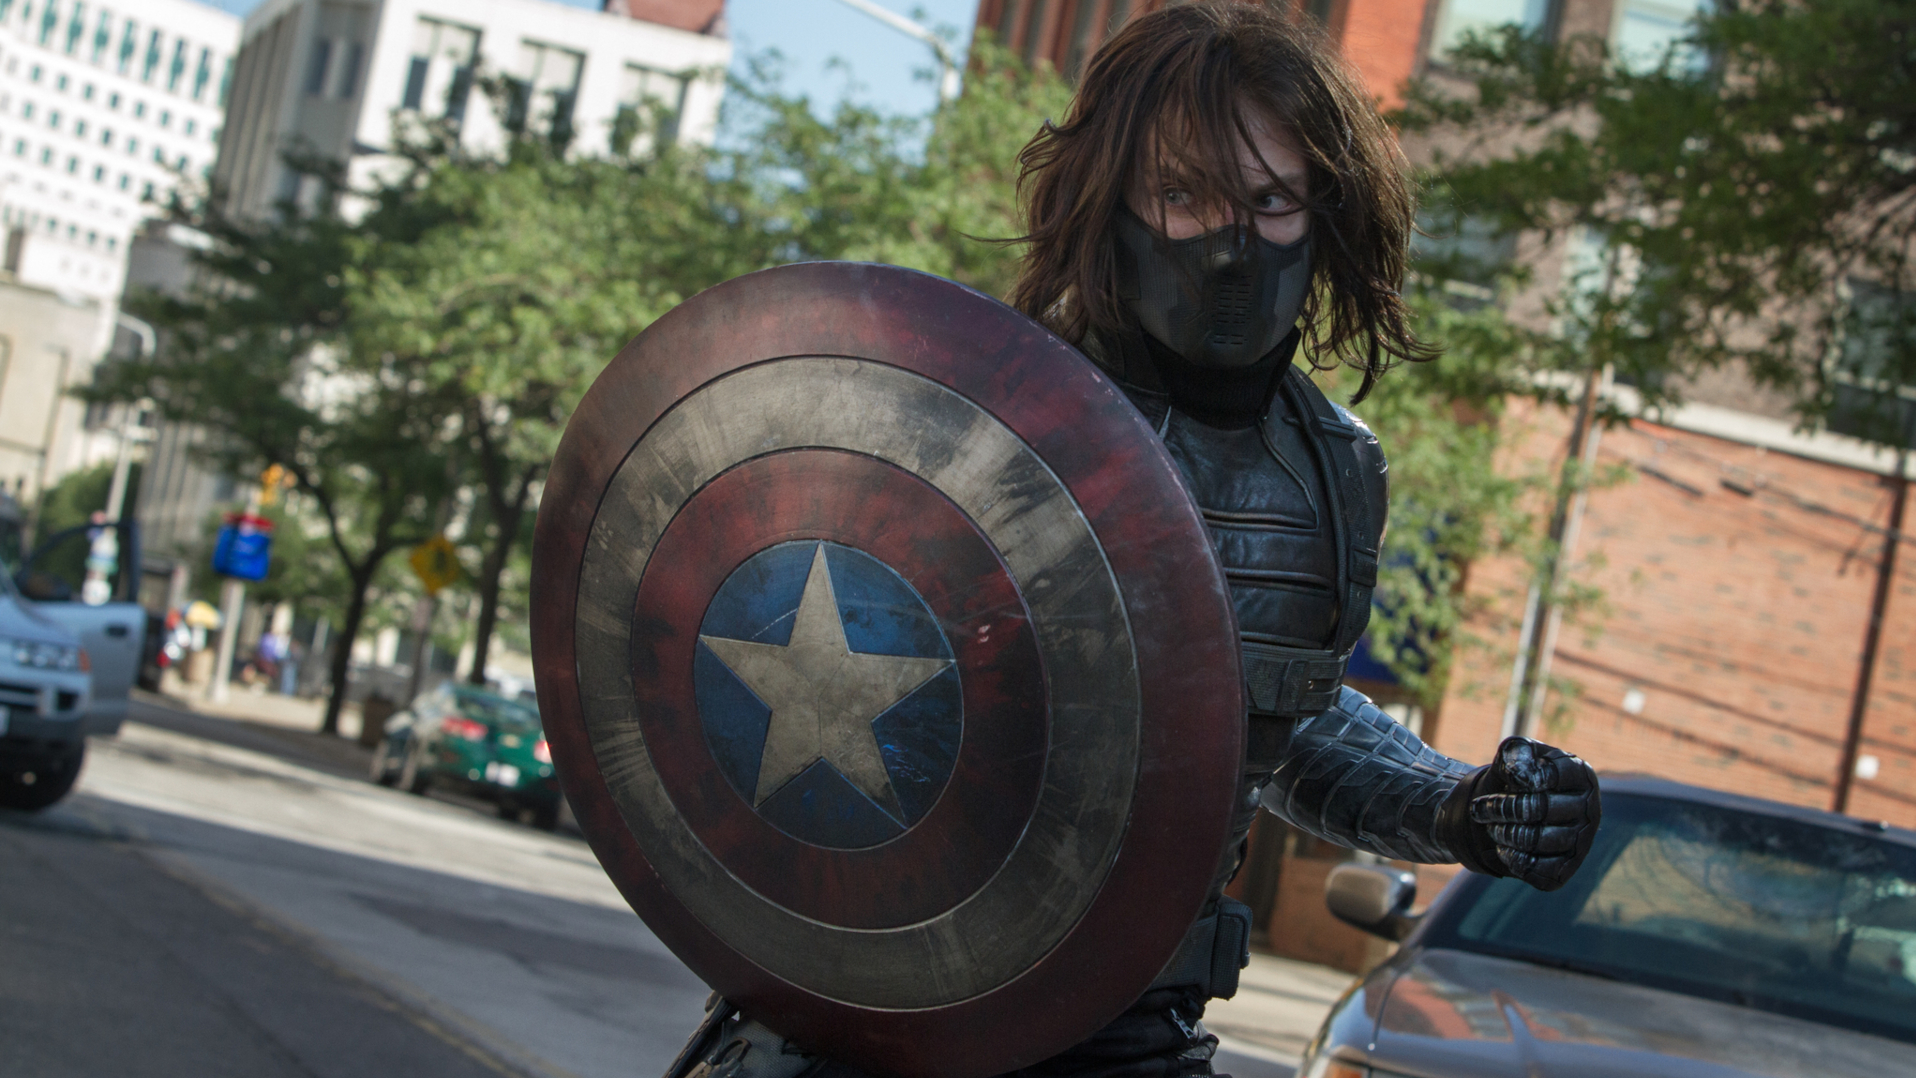 Captain America The Winter Soldier (2014)_Marvel